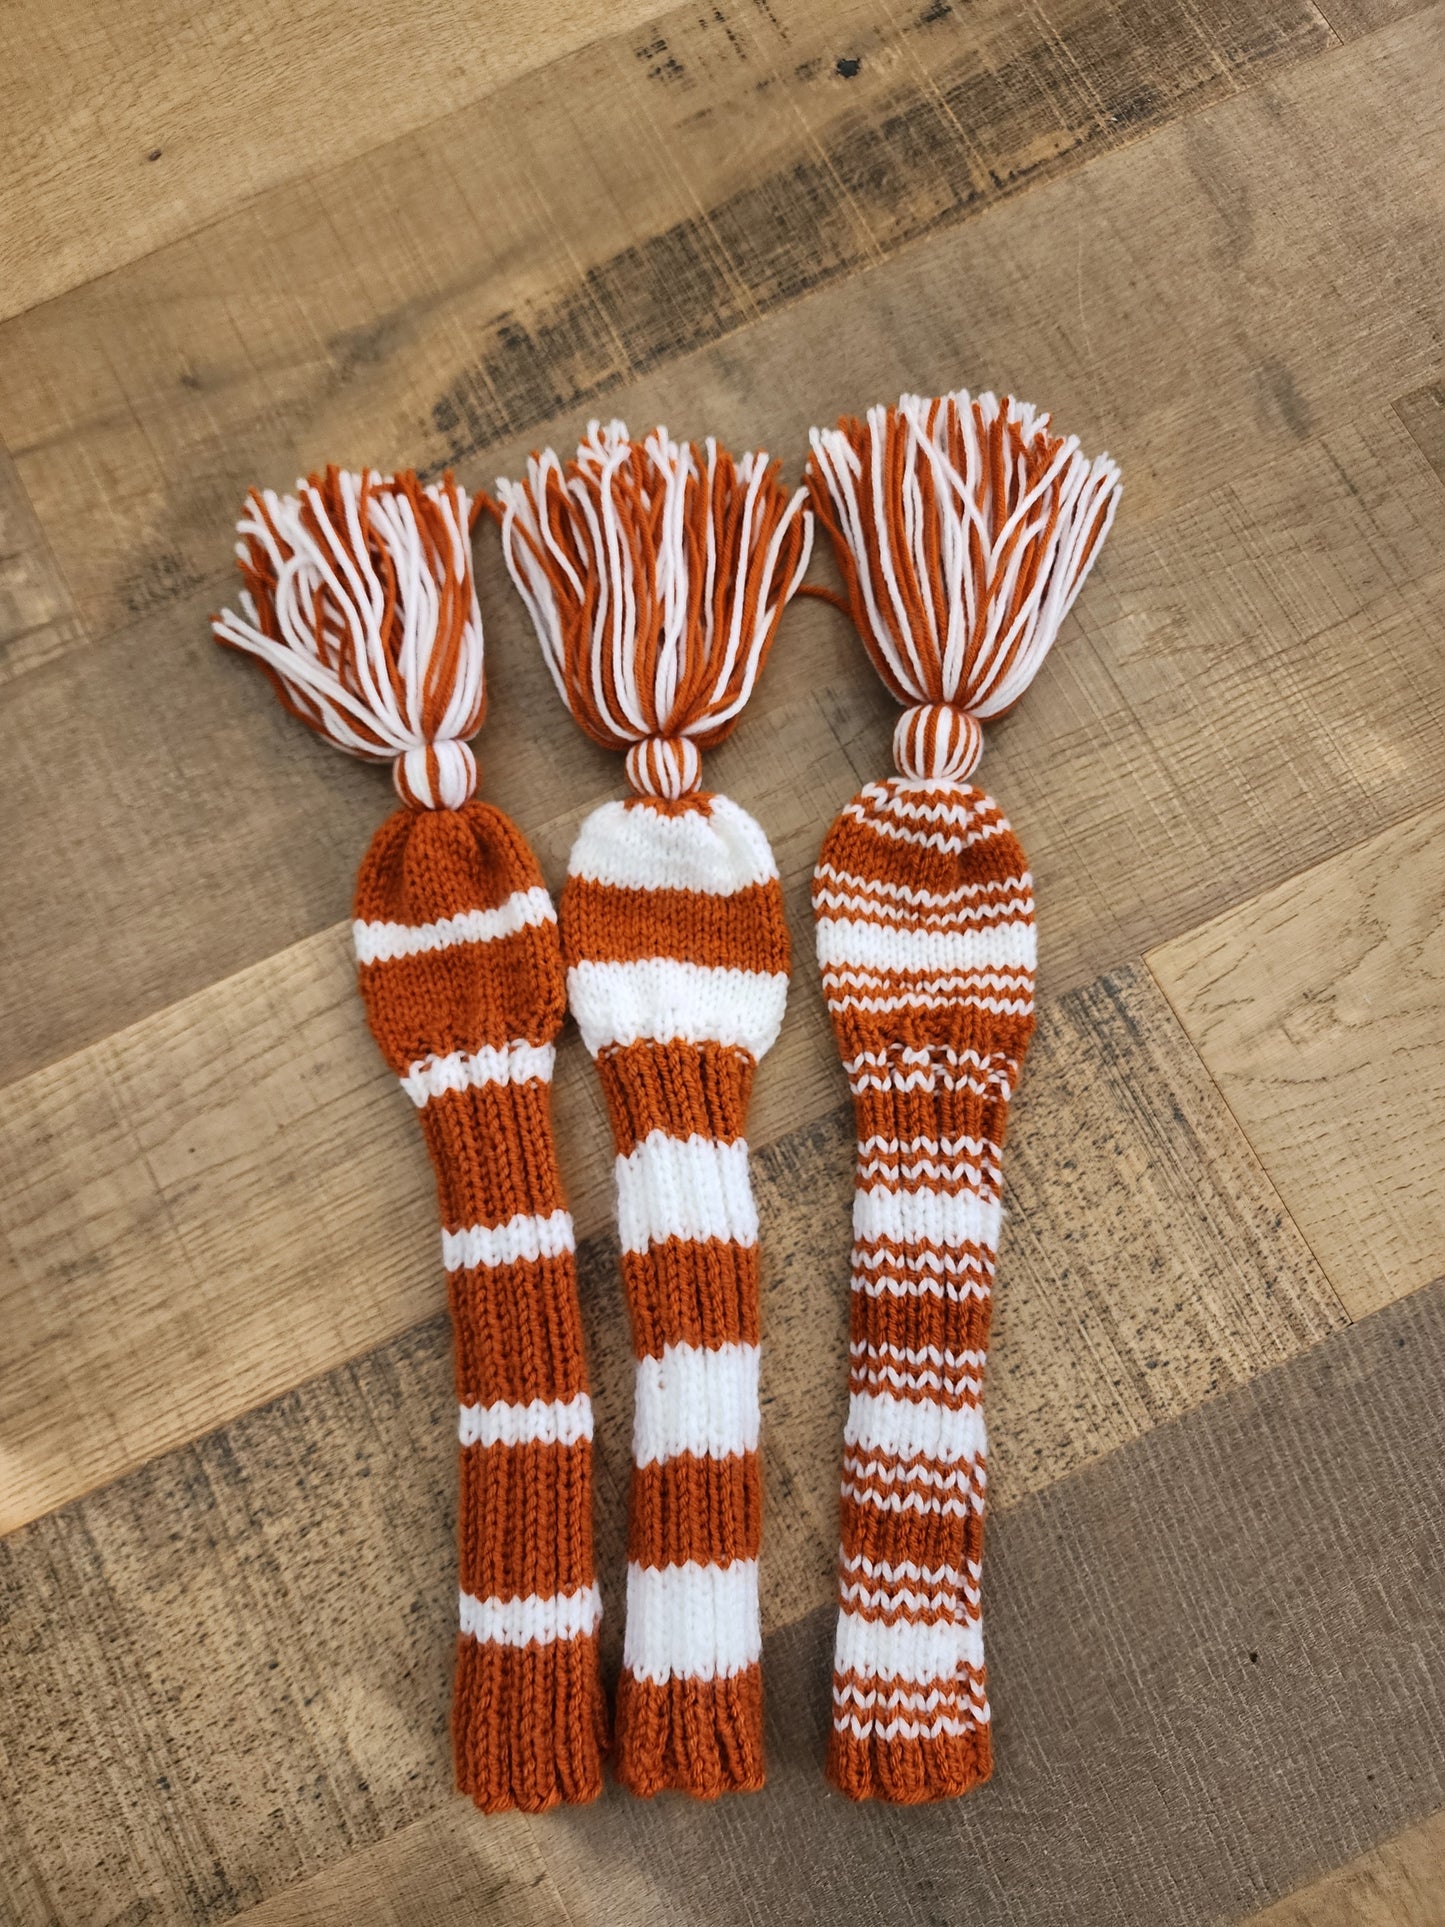 Three Golf Club Head Covers Retro-Vintage Orange & White with Tassels for Drivers, Woods - Austinknittylimits